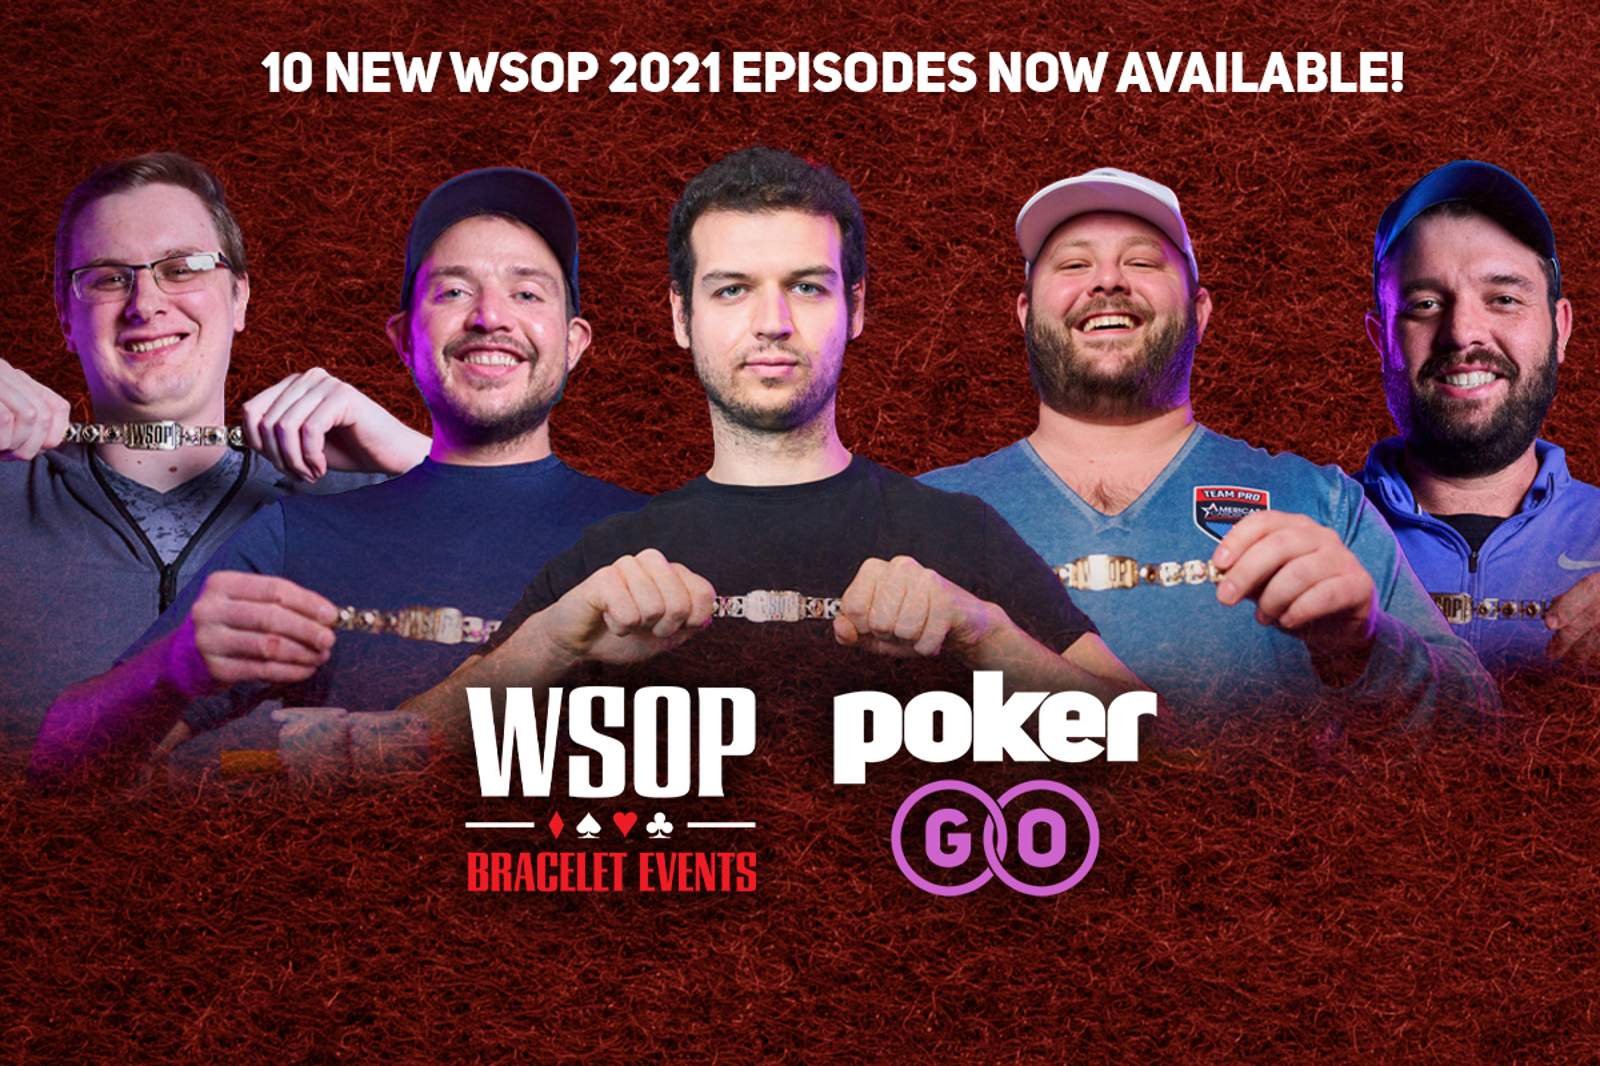 Episodes 13-22 Now Available from 2021 WSOP Bracelet Events